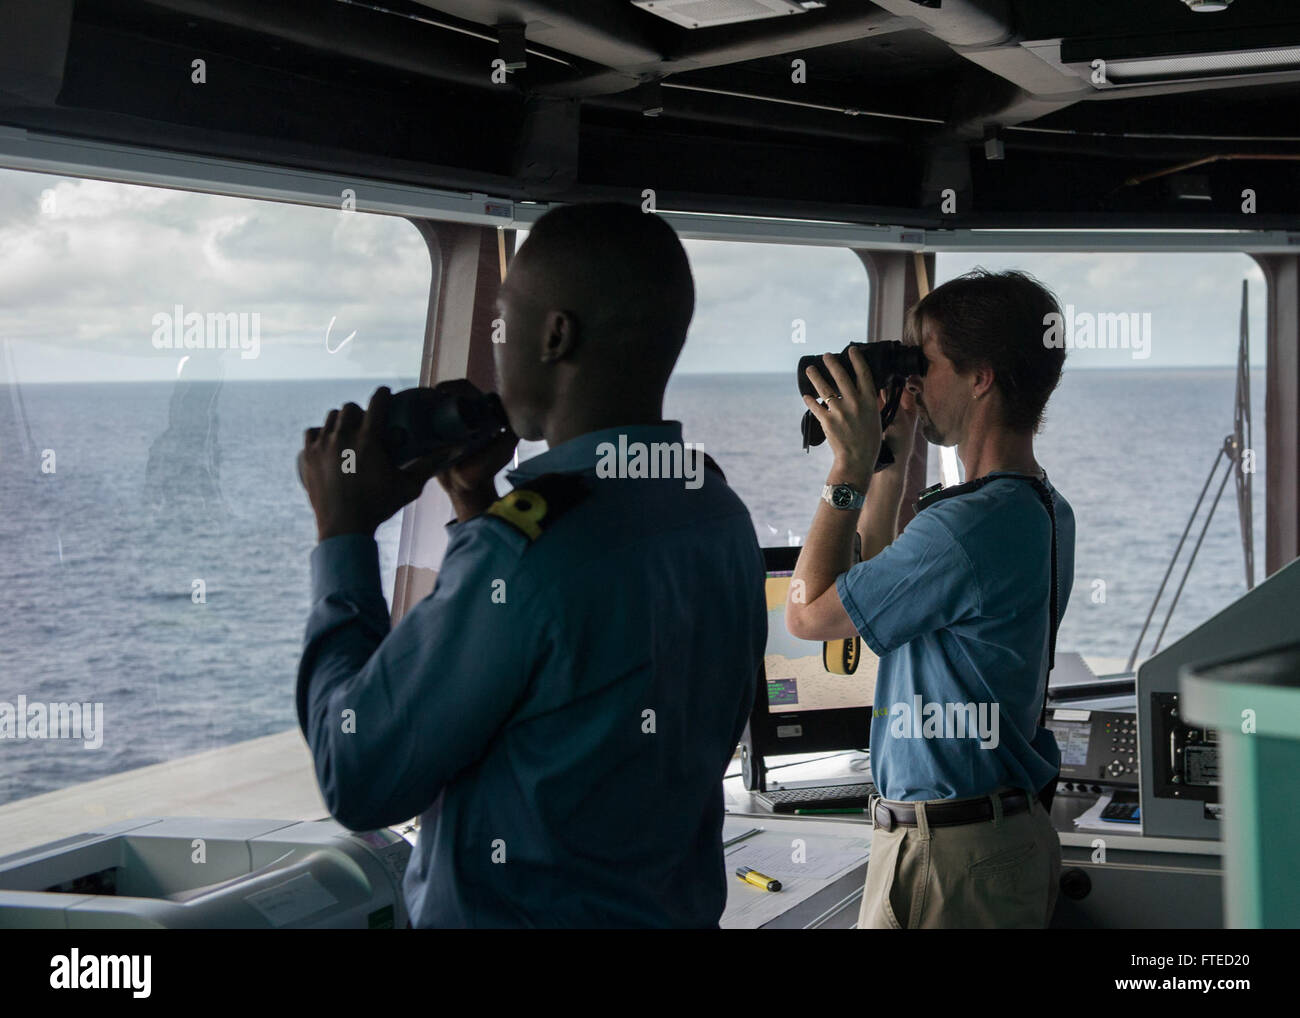 GULF OF GUINEA (April 2, 2014) - A Ghanaian sailor, left, and Captain Doug Casavant, civil service master aboard joint, high-speed vessel USNS Spearhead (JHSV 1) look through binoculars at a suspected illegal fishing vessel as part of a U.S.-Ghana combined maritime law enforcement operation under the African Maritime Law Enforcement Partnership (AMLEP) program as part of a U.S.-Ghana combined maritime law enforcement operation under the African Maritime Law Enforcement Partnership (AMLEP) program. AMLEP, the operational phase of Africa Partnership Station (APS), brings toget Stock Photo